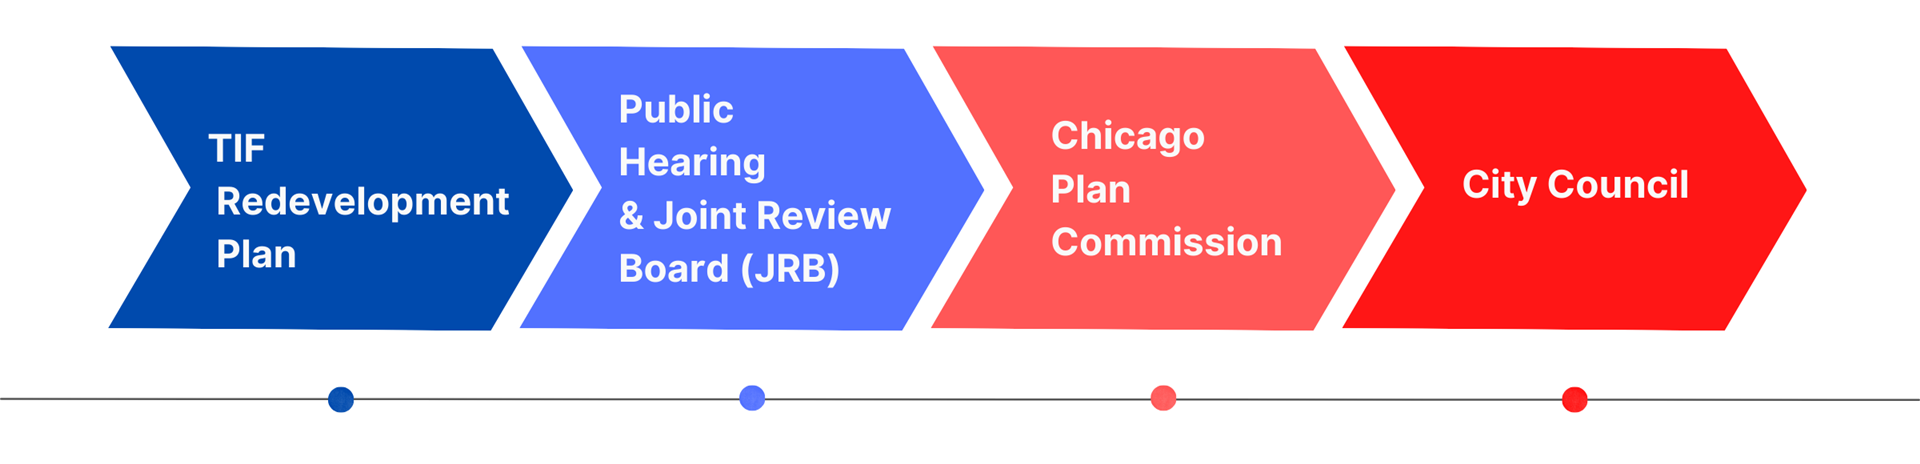 TIF Redevelopment Plan > Public Hearing & Joint Review Board (JRB) > Chicago Plan Commission > City Council